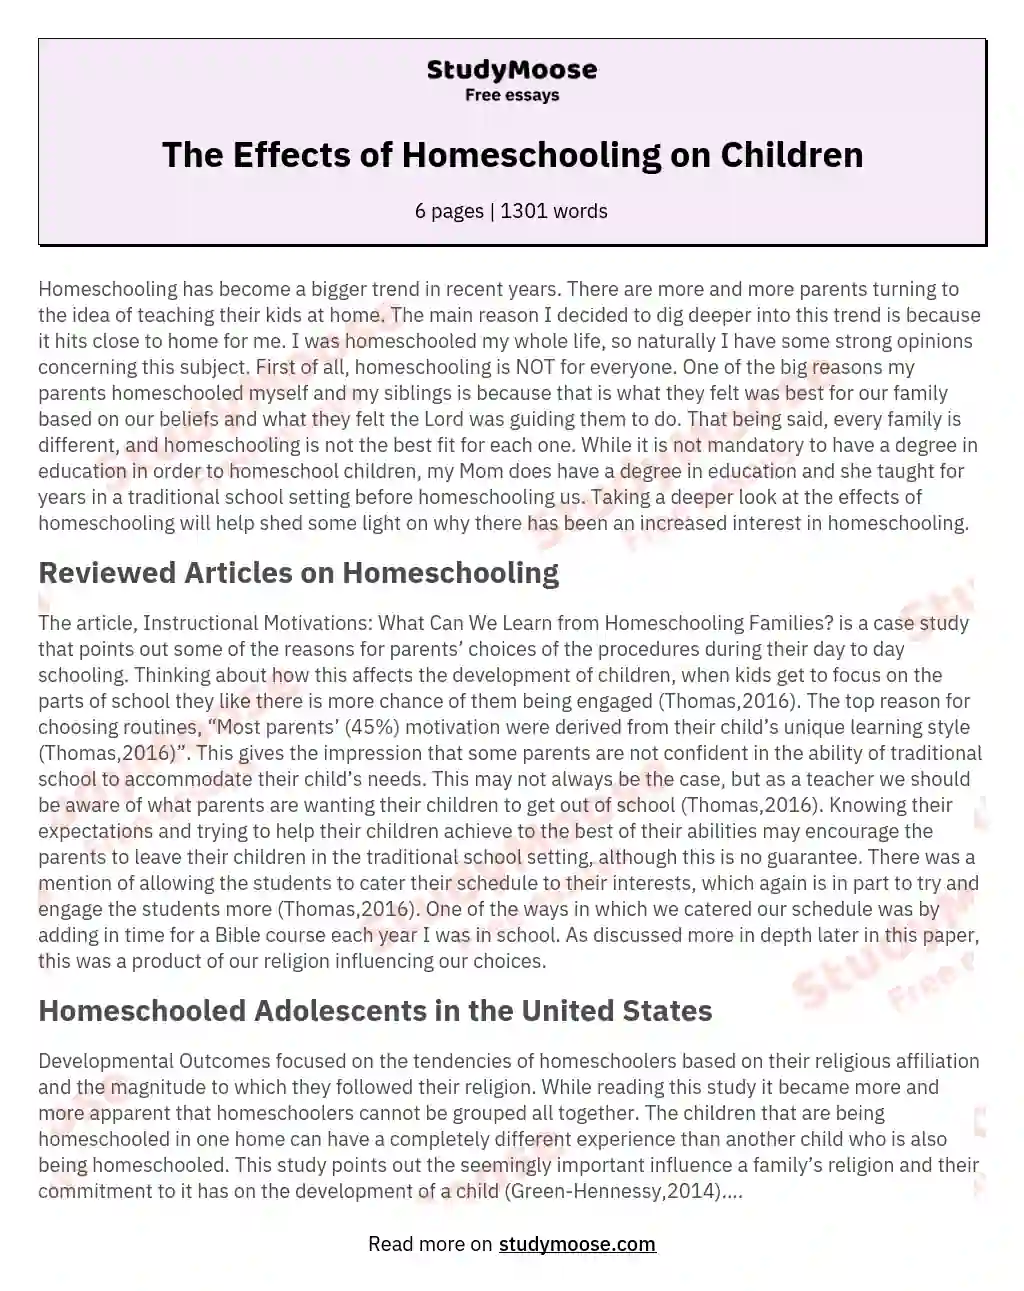 The Effects of Homeschooling on Children essay